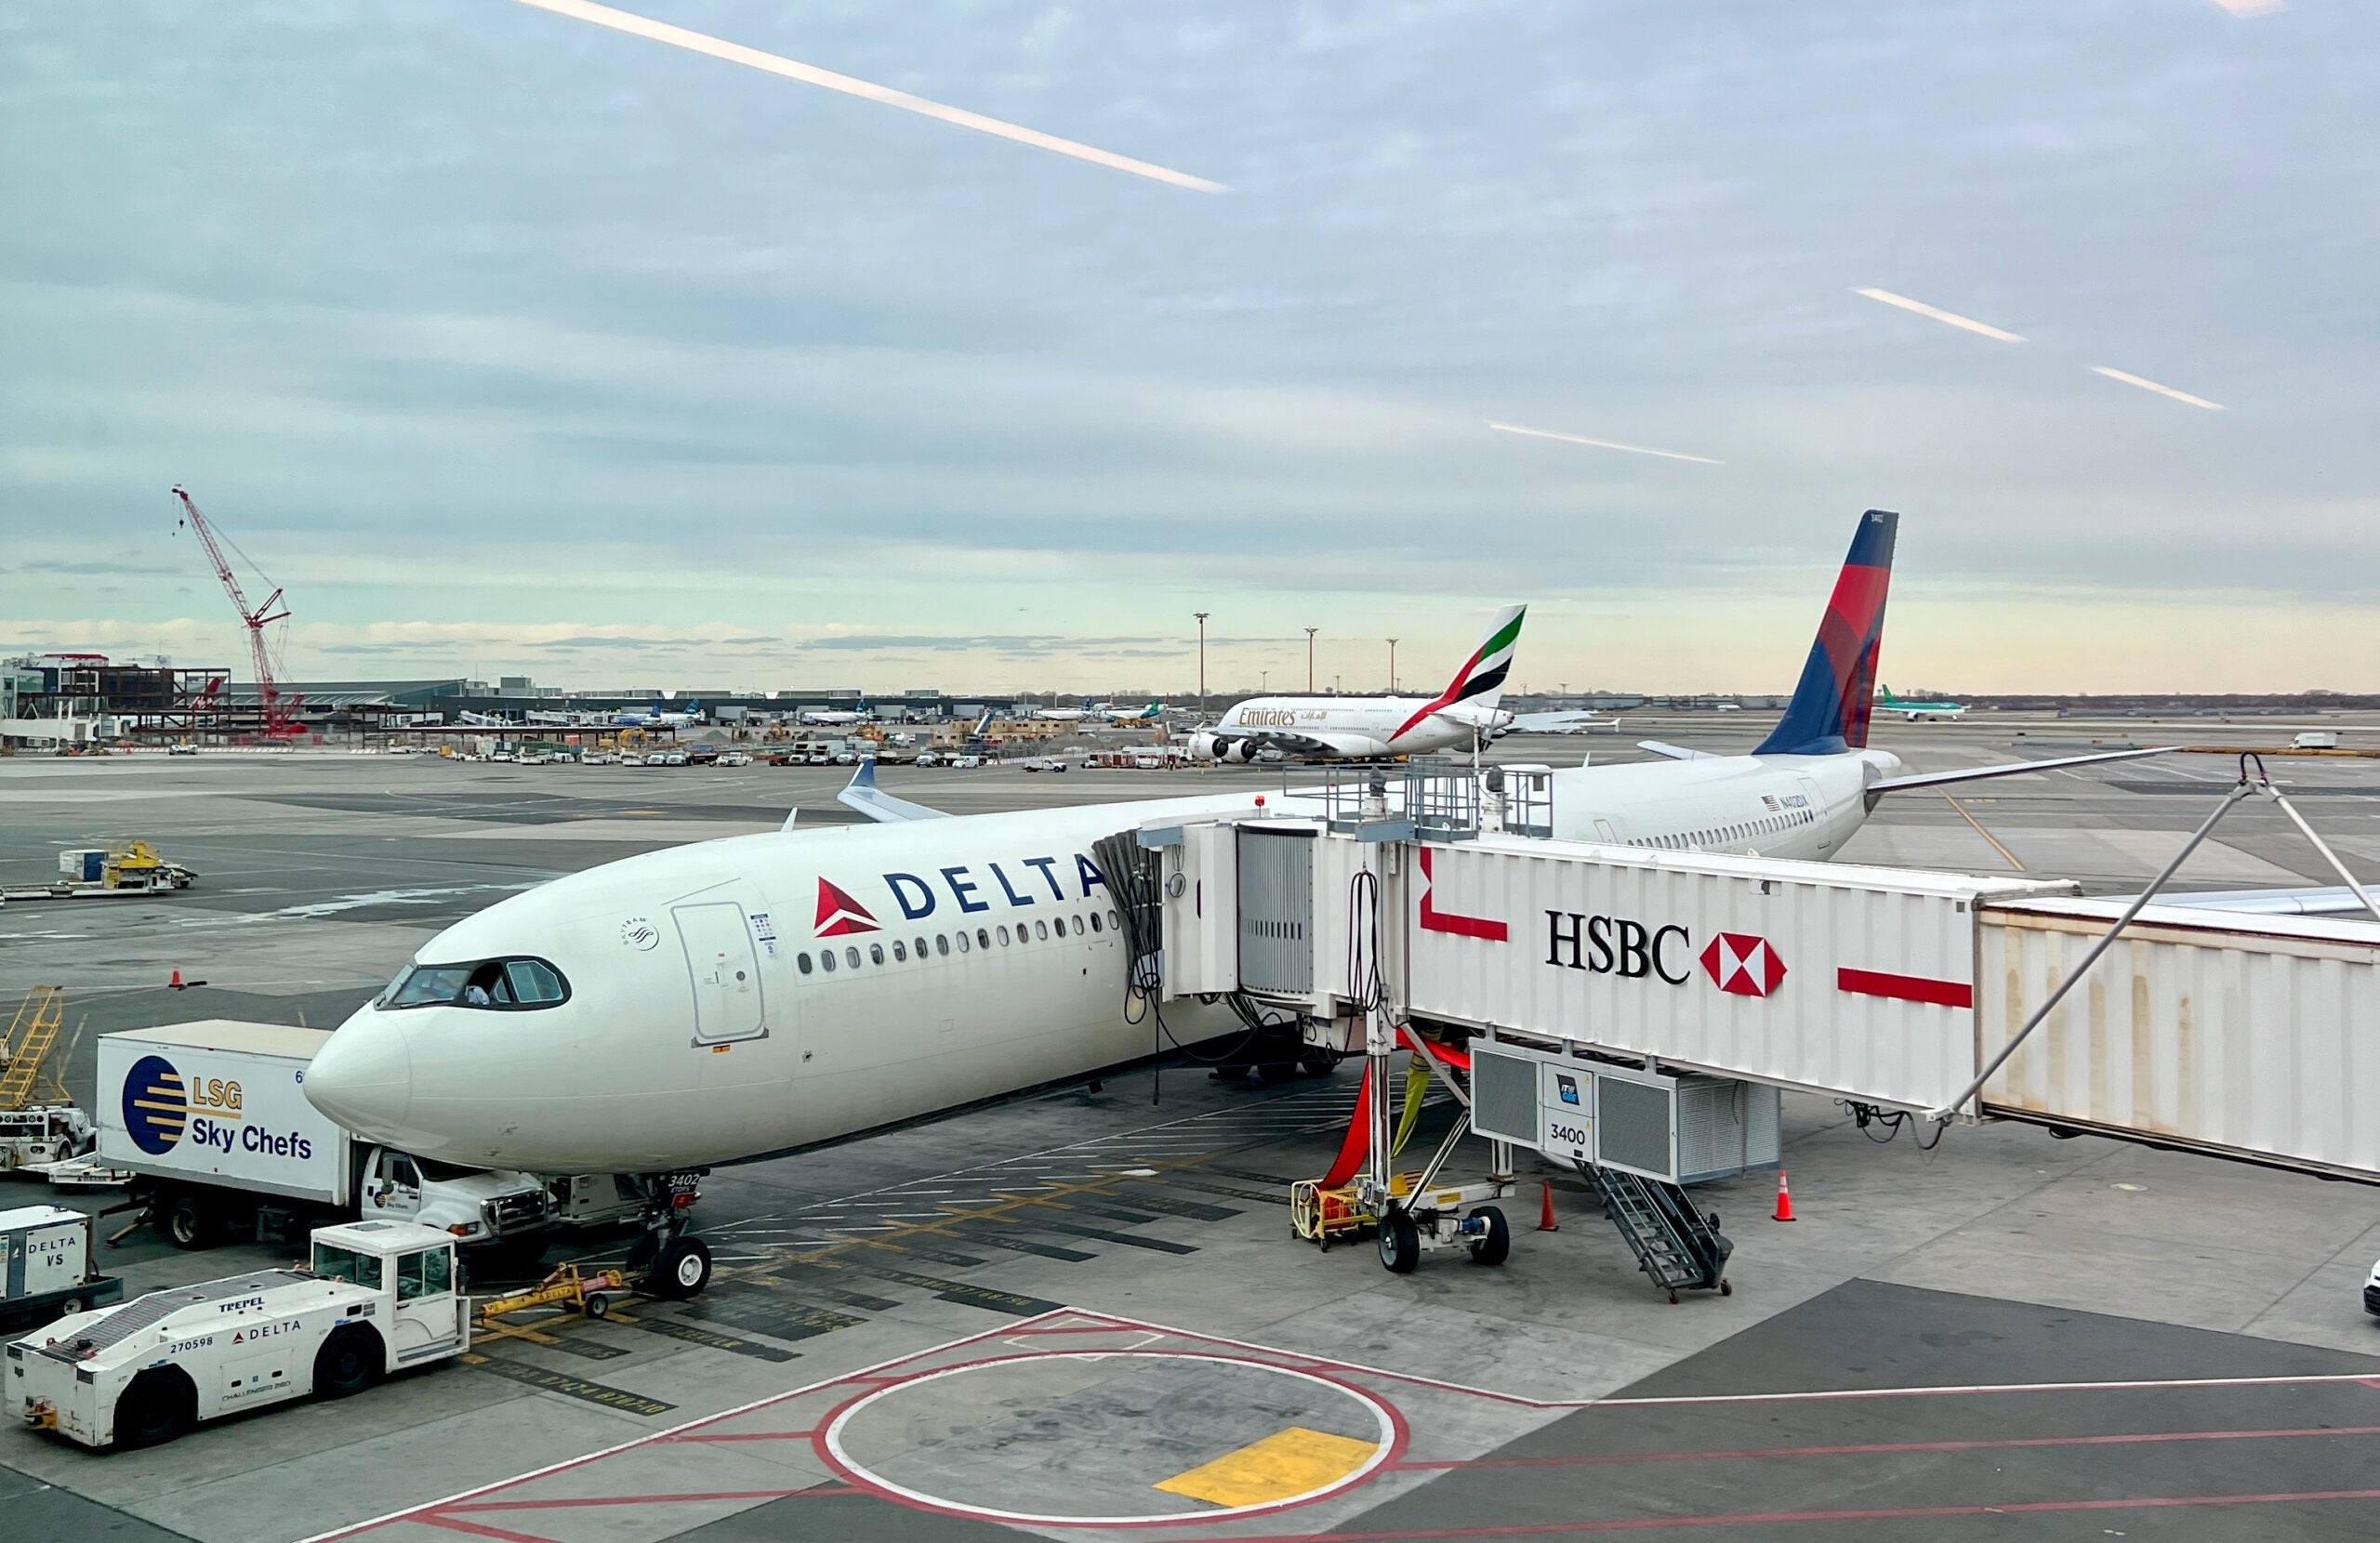 Delta A330-900neo at the gate in JFK airport